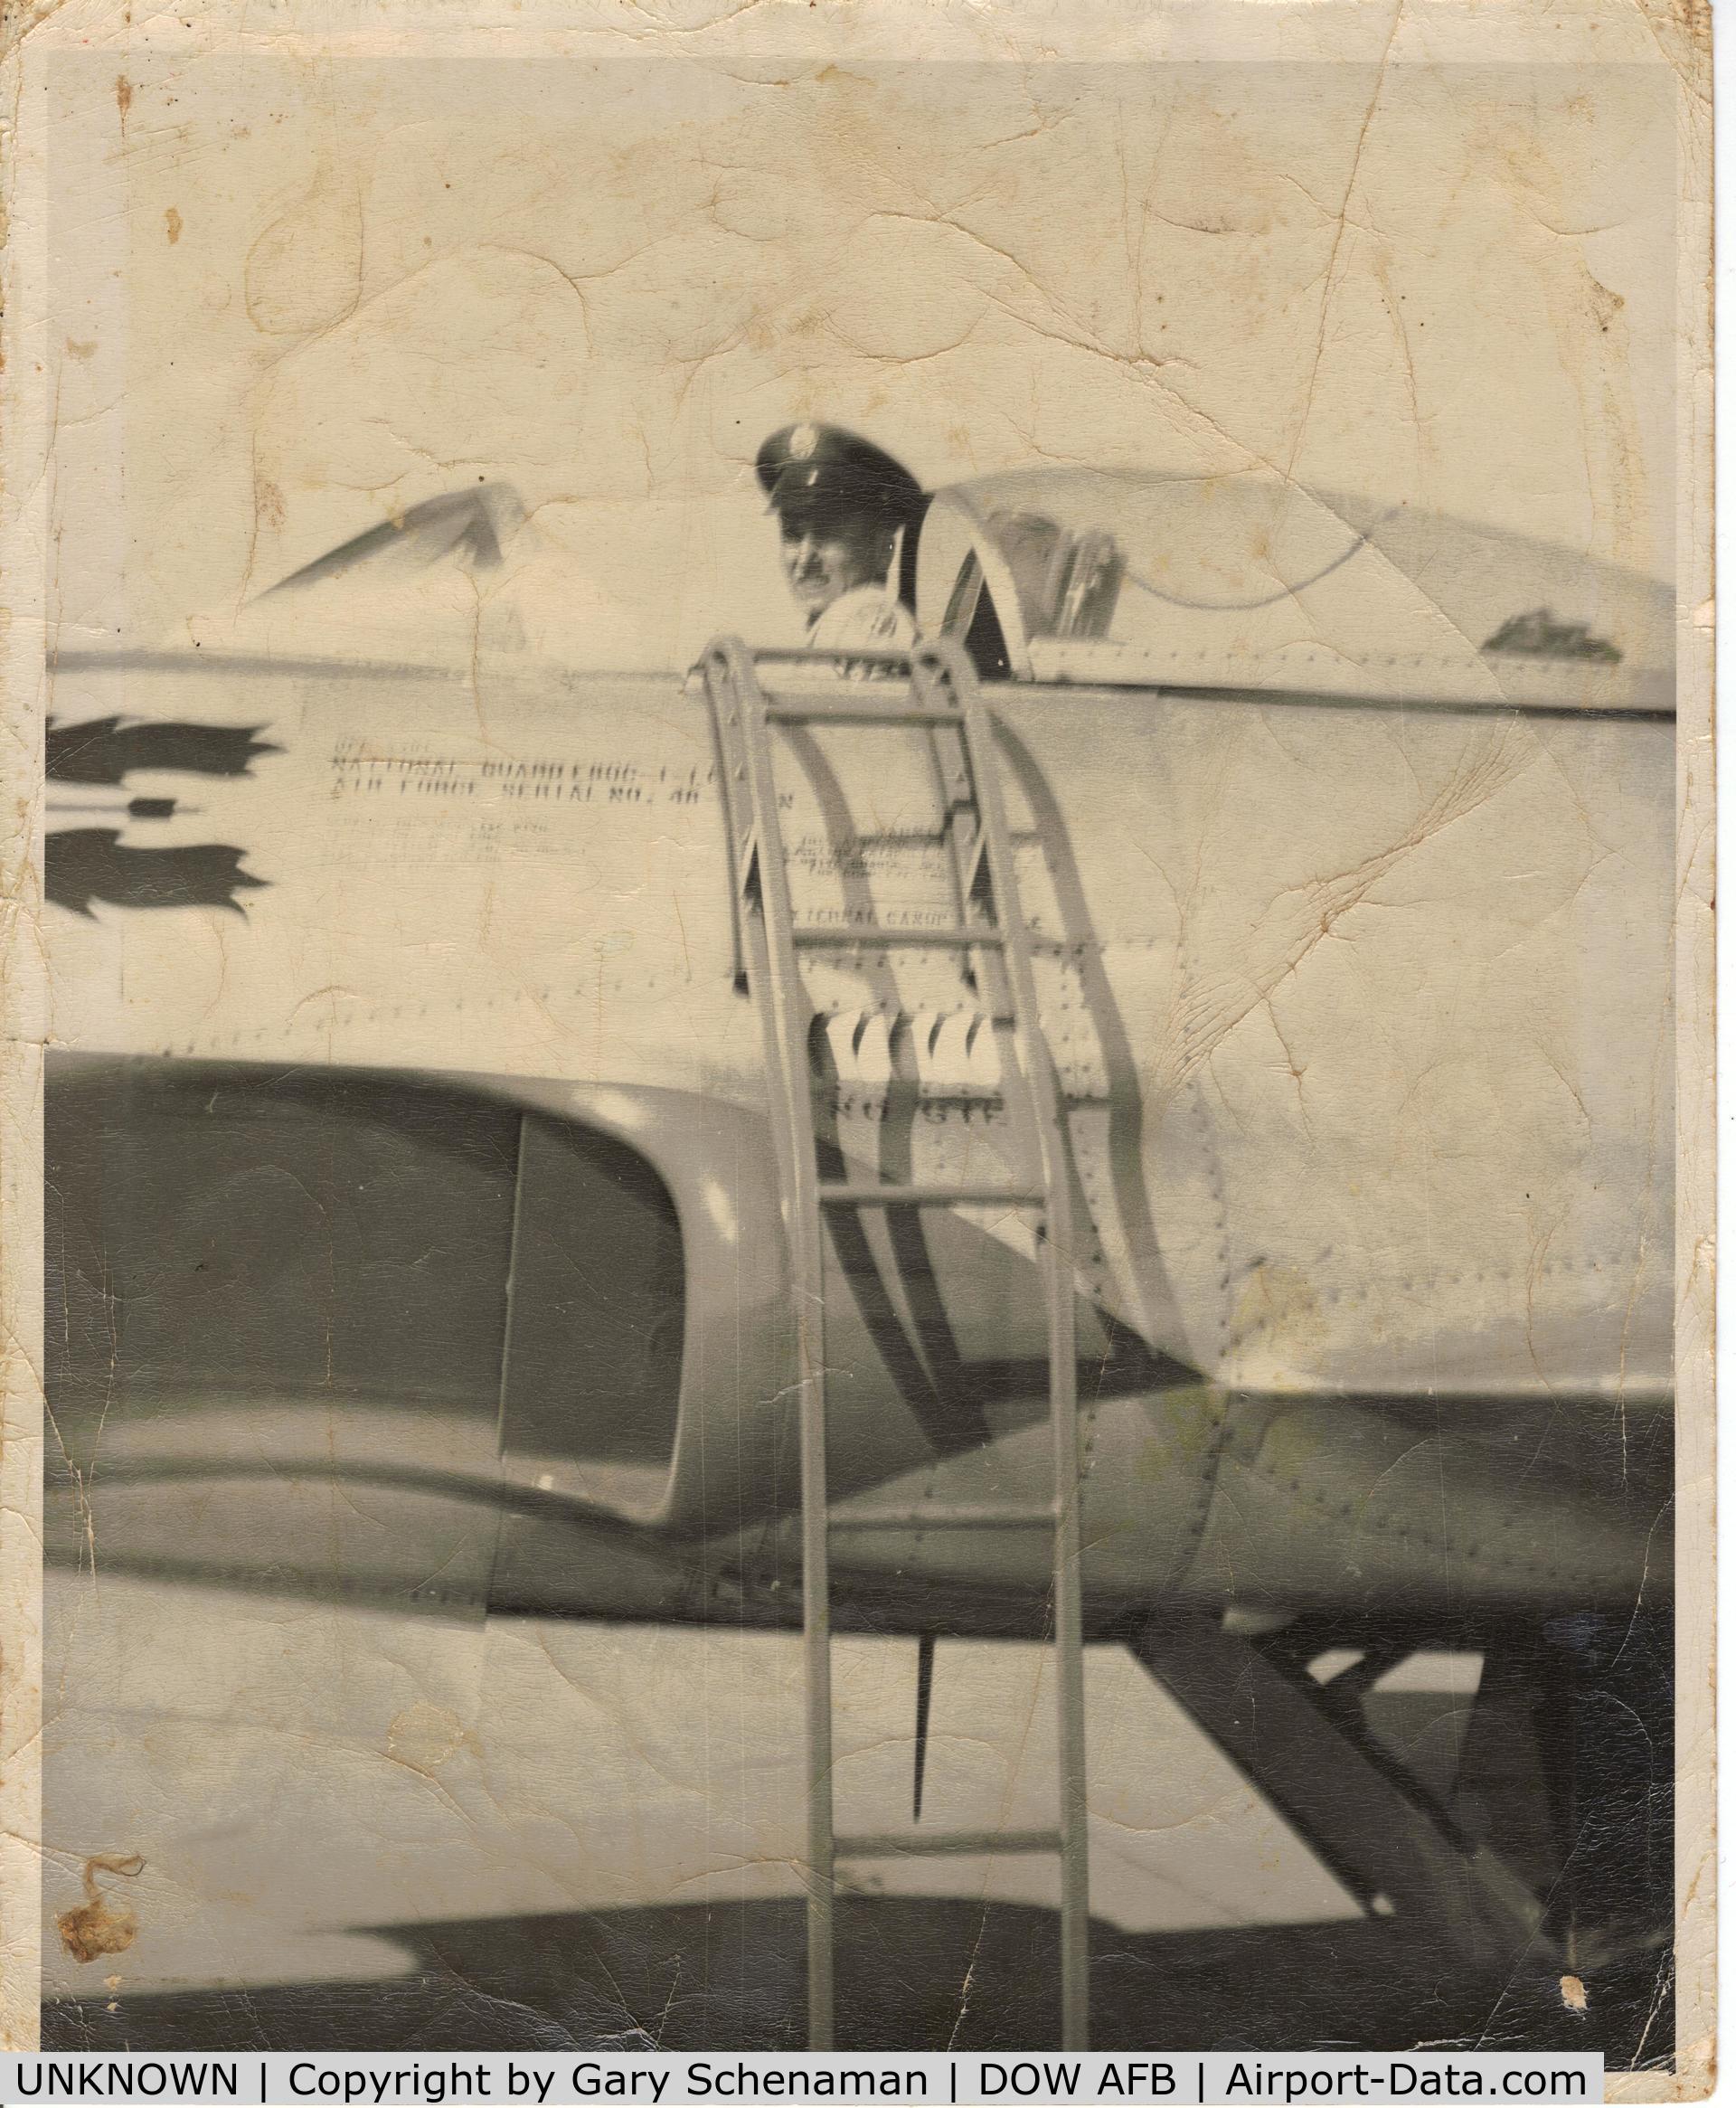 UNKNOWN, Miscellaneous Various C/N unknown, MY LATE FATHER IN A F-80 SHOOTING STAR @ DOW AFB.  BANGOR, MAINE.  SOMETIME BETWEEN 1948-1953 KOREAN CONFLICT